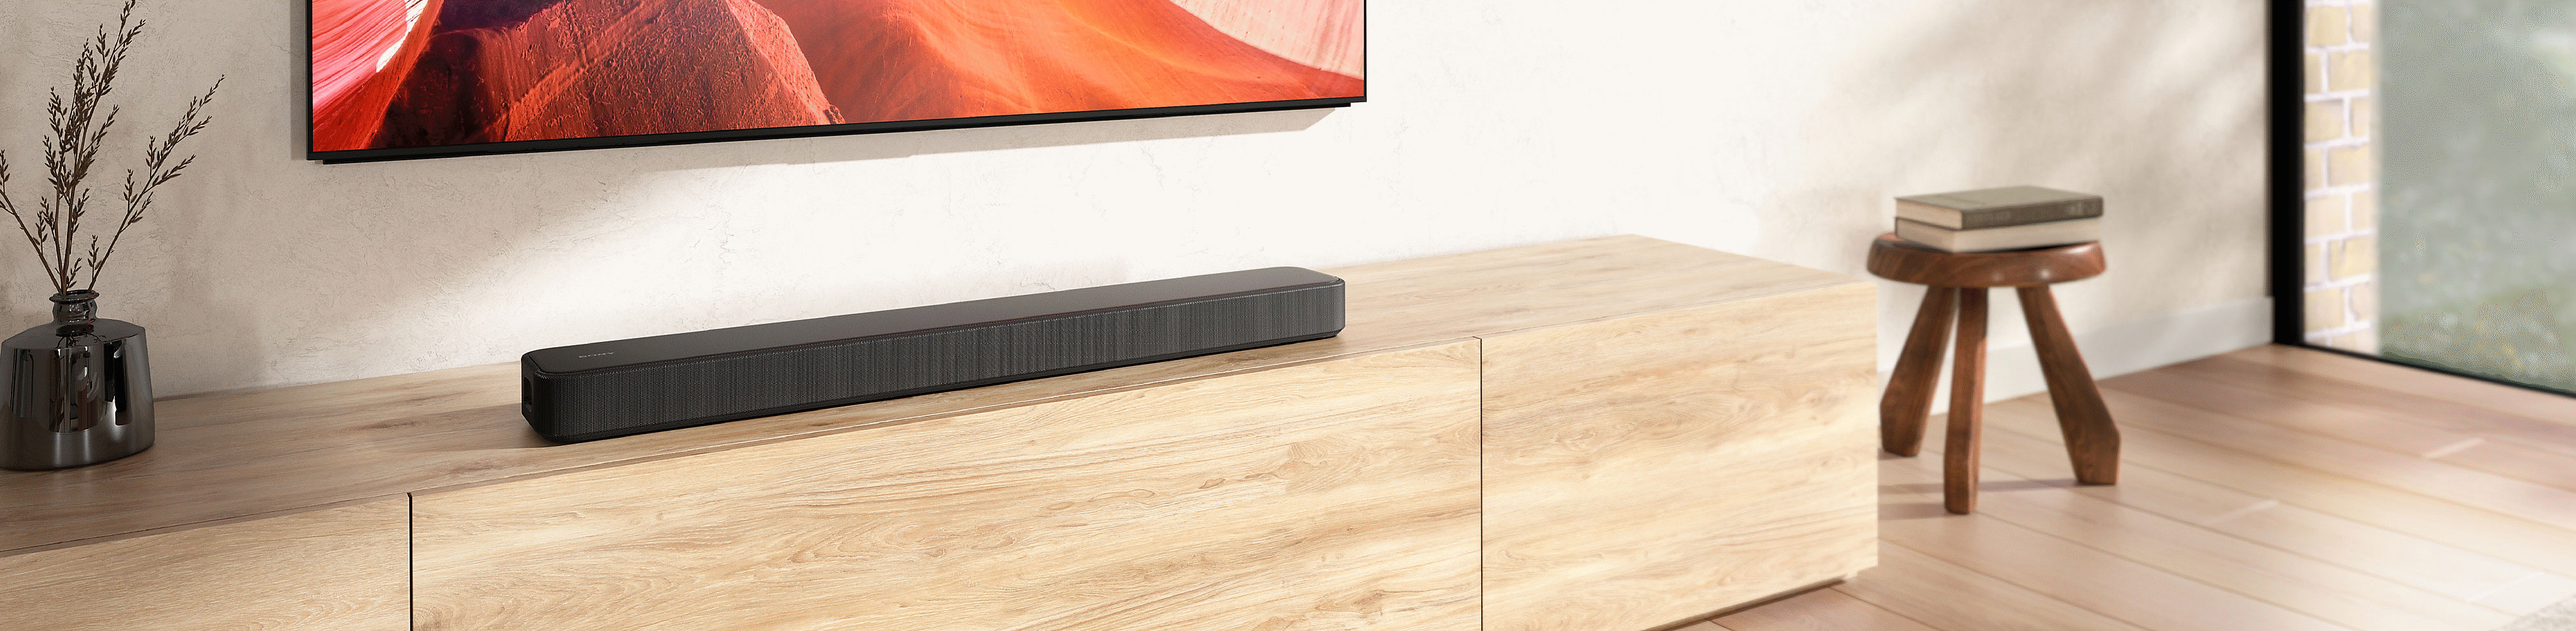 Image of the HT-S2000 sound bar sitting on a wooden TV unit